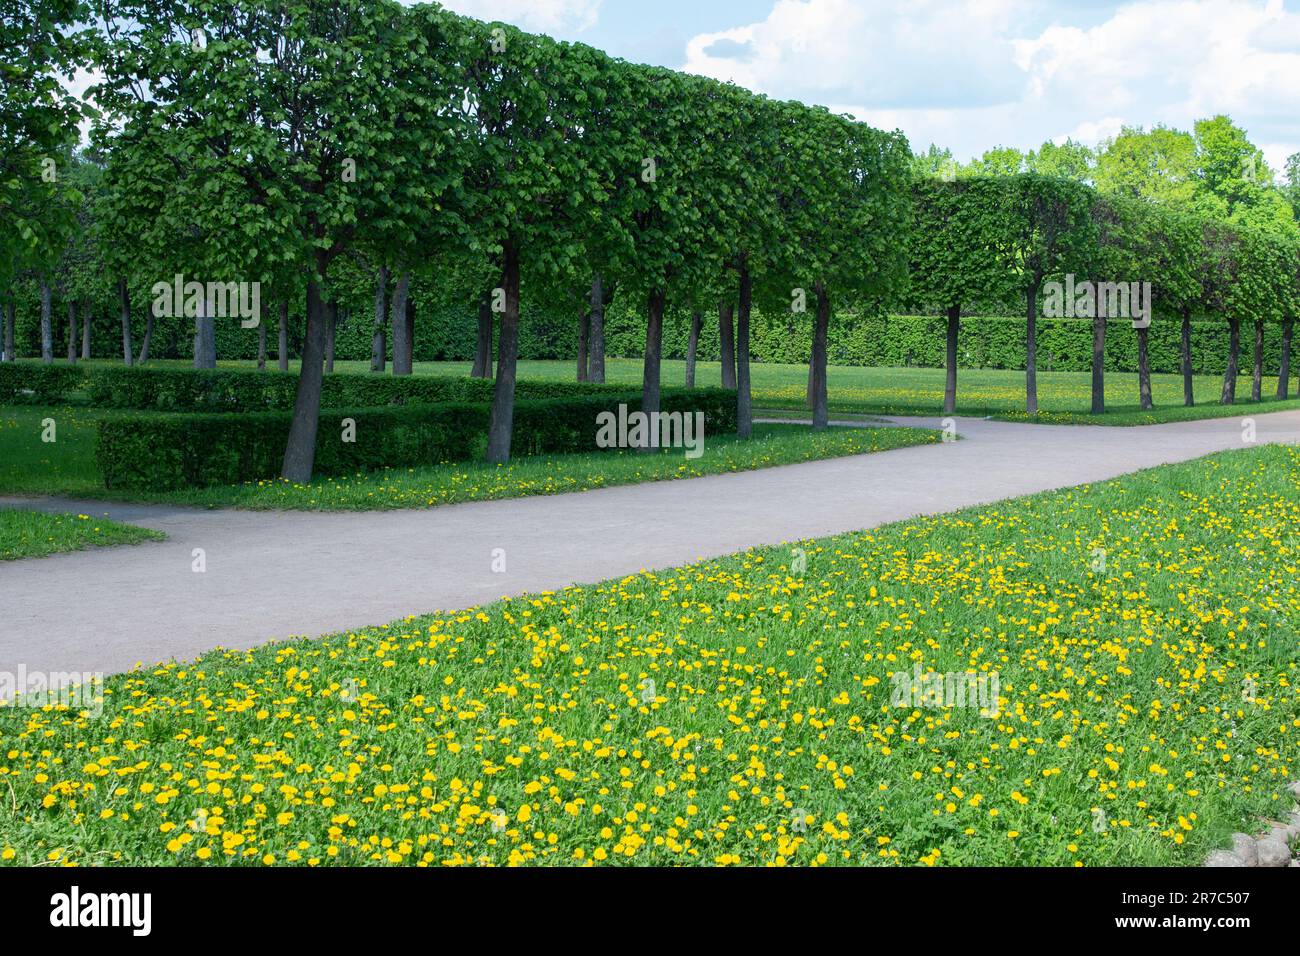 Topiary haircut of trees and shrubbery in the form of a cube. Shrubbery hedge. Spring blooms of dandelions on the lawn. English landscaping. Stock Photo